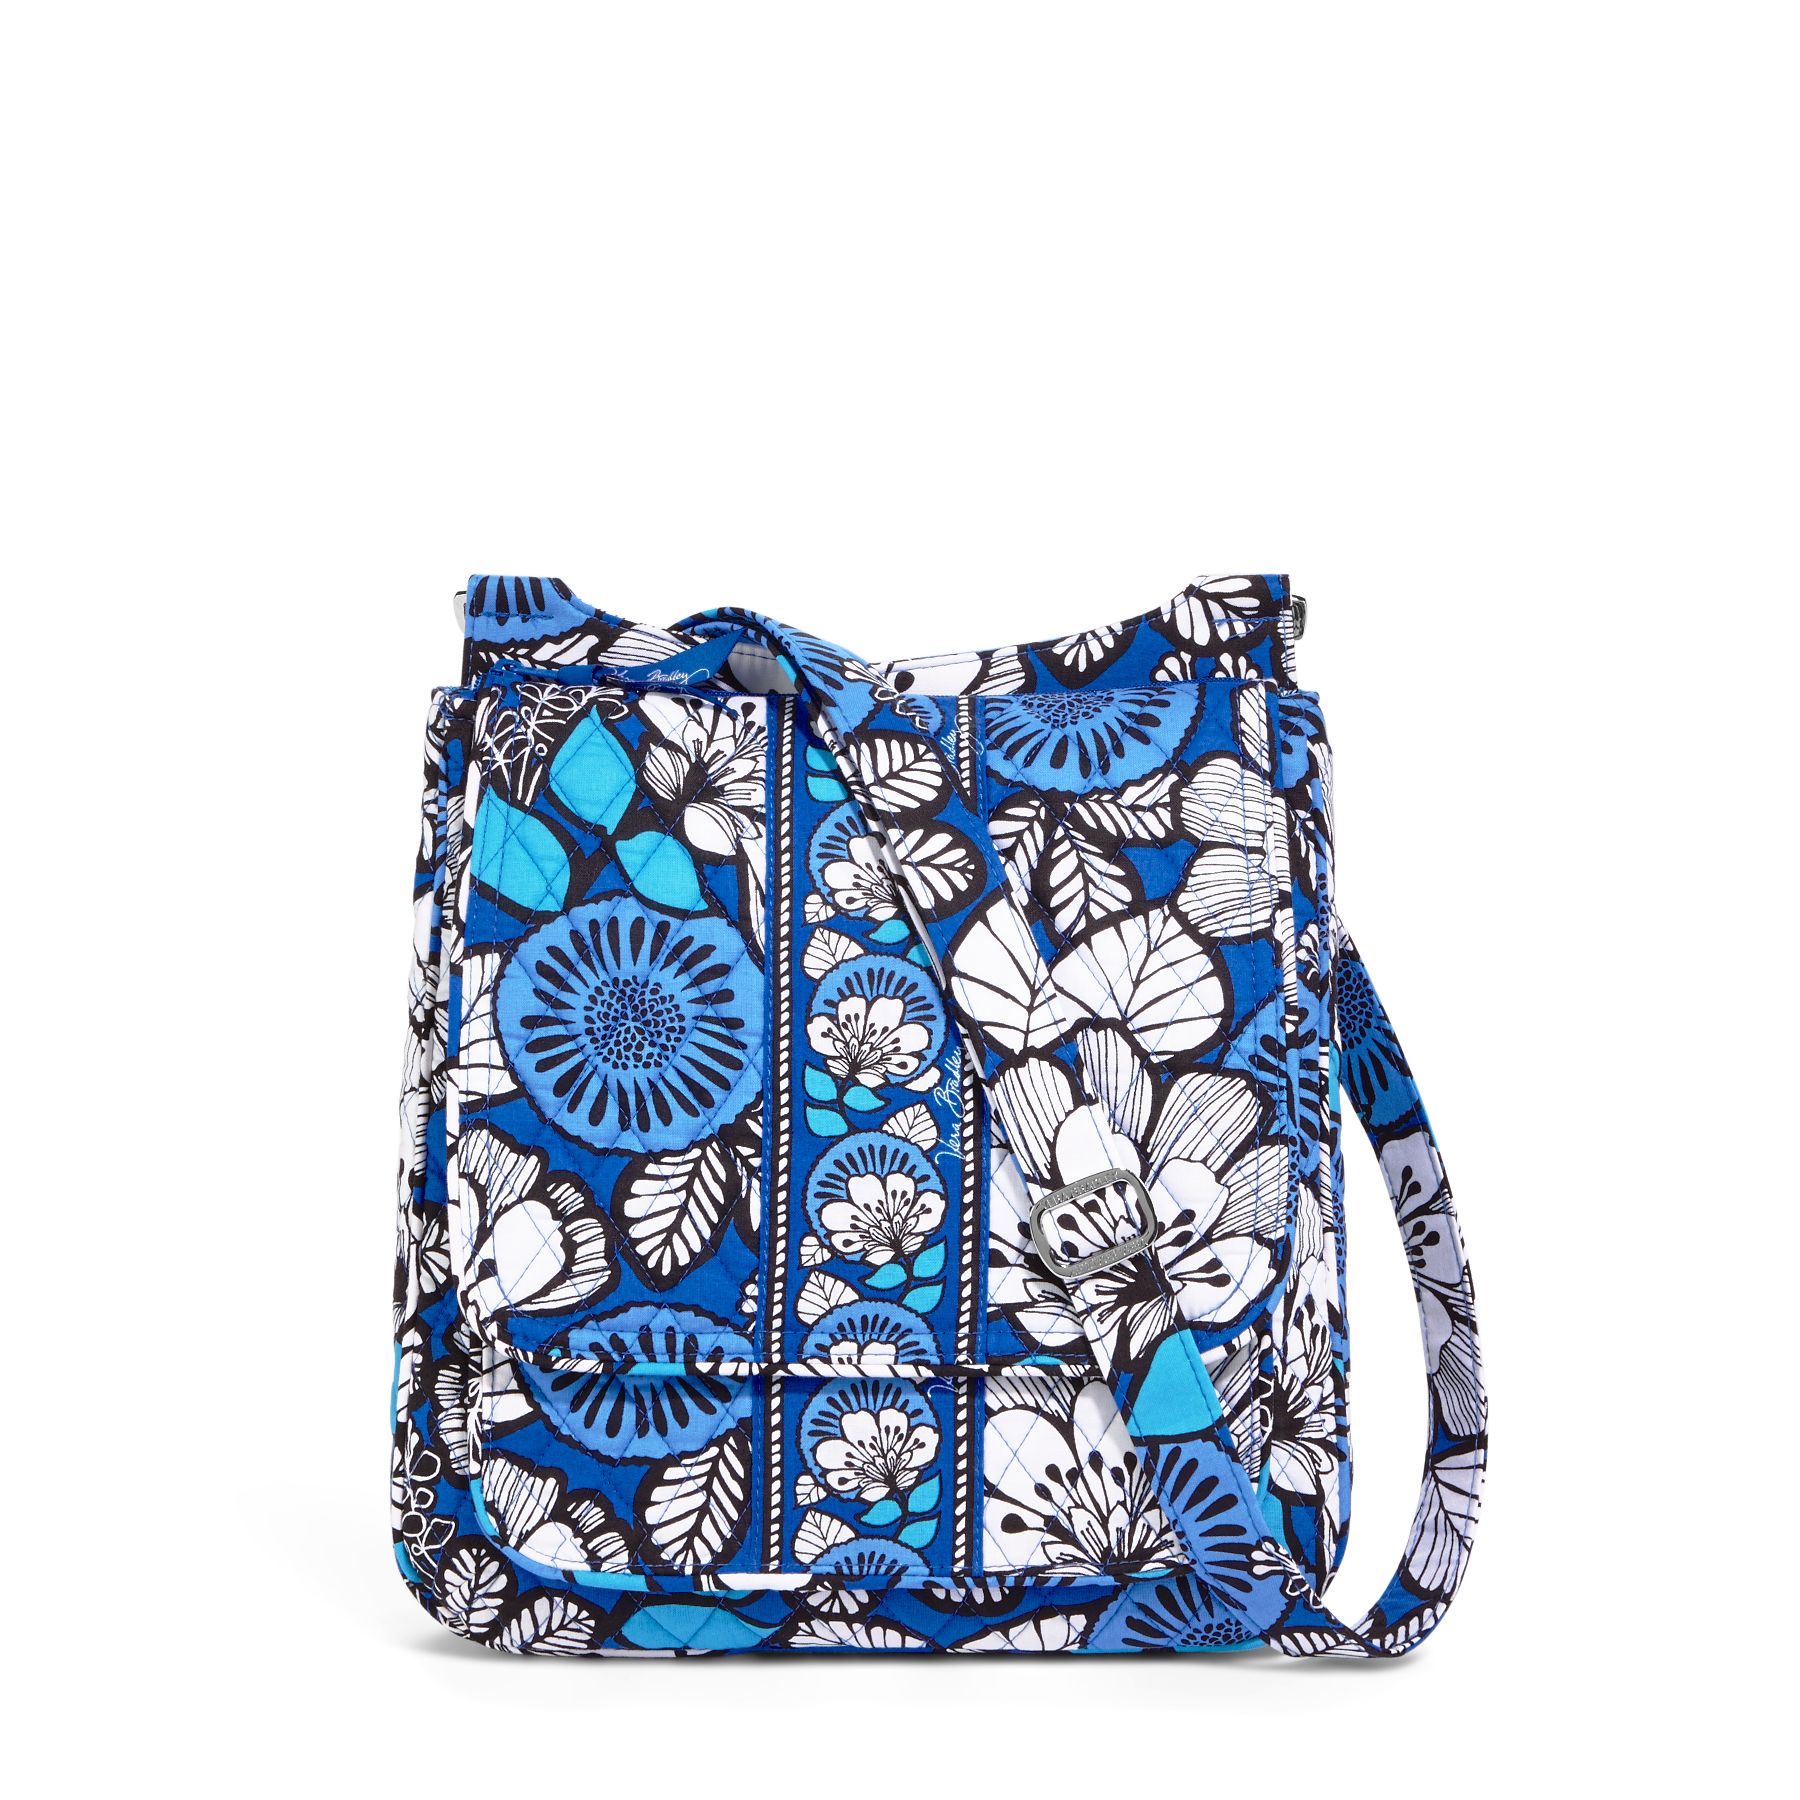 Vera Bradley additional 15% off Online Clearance